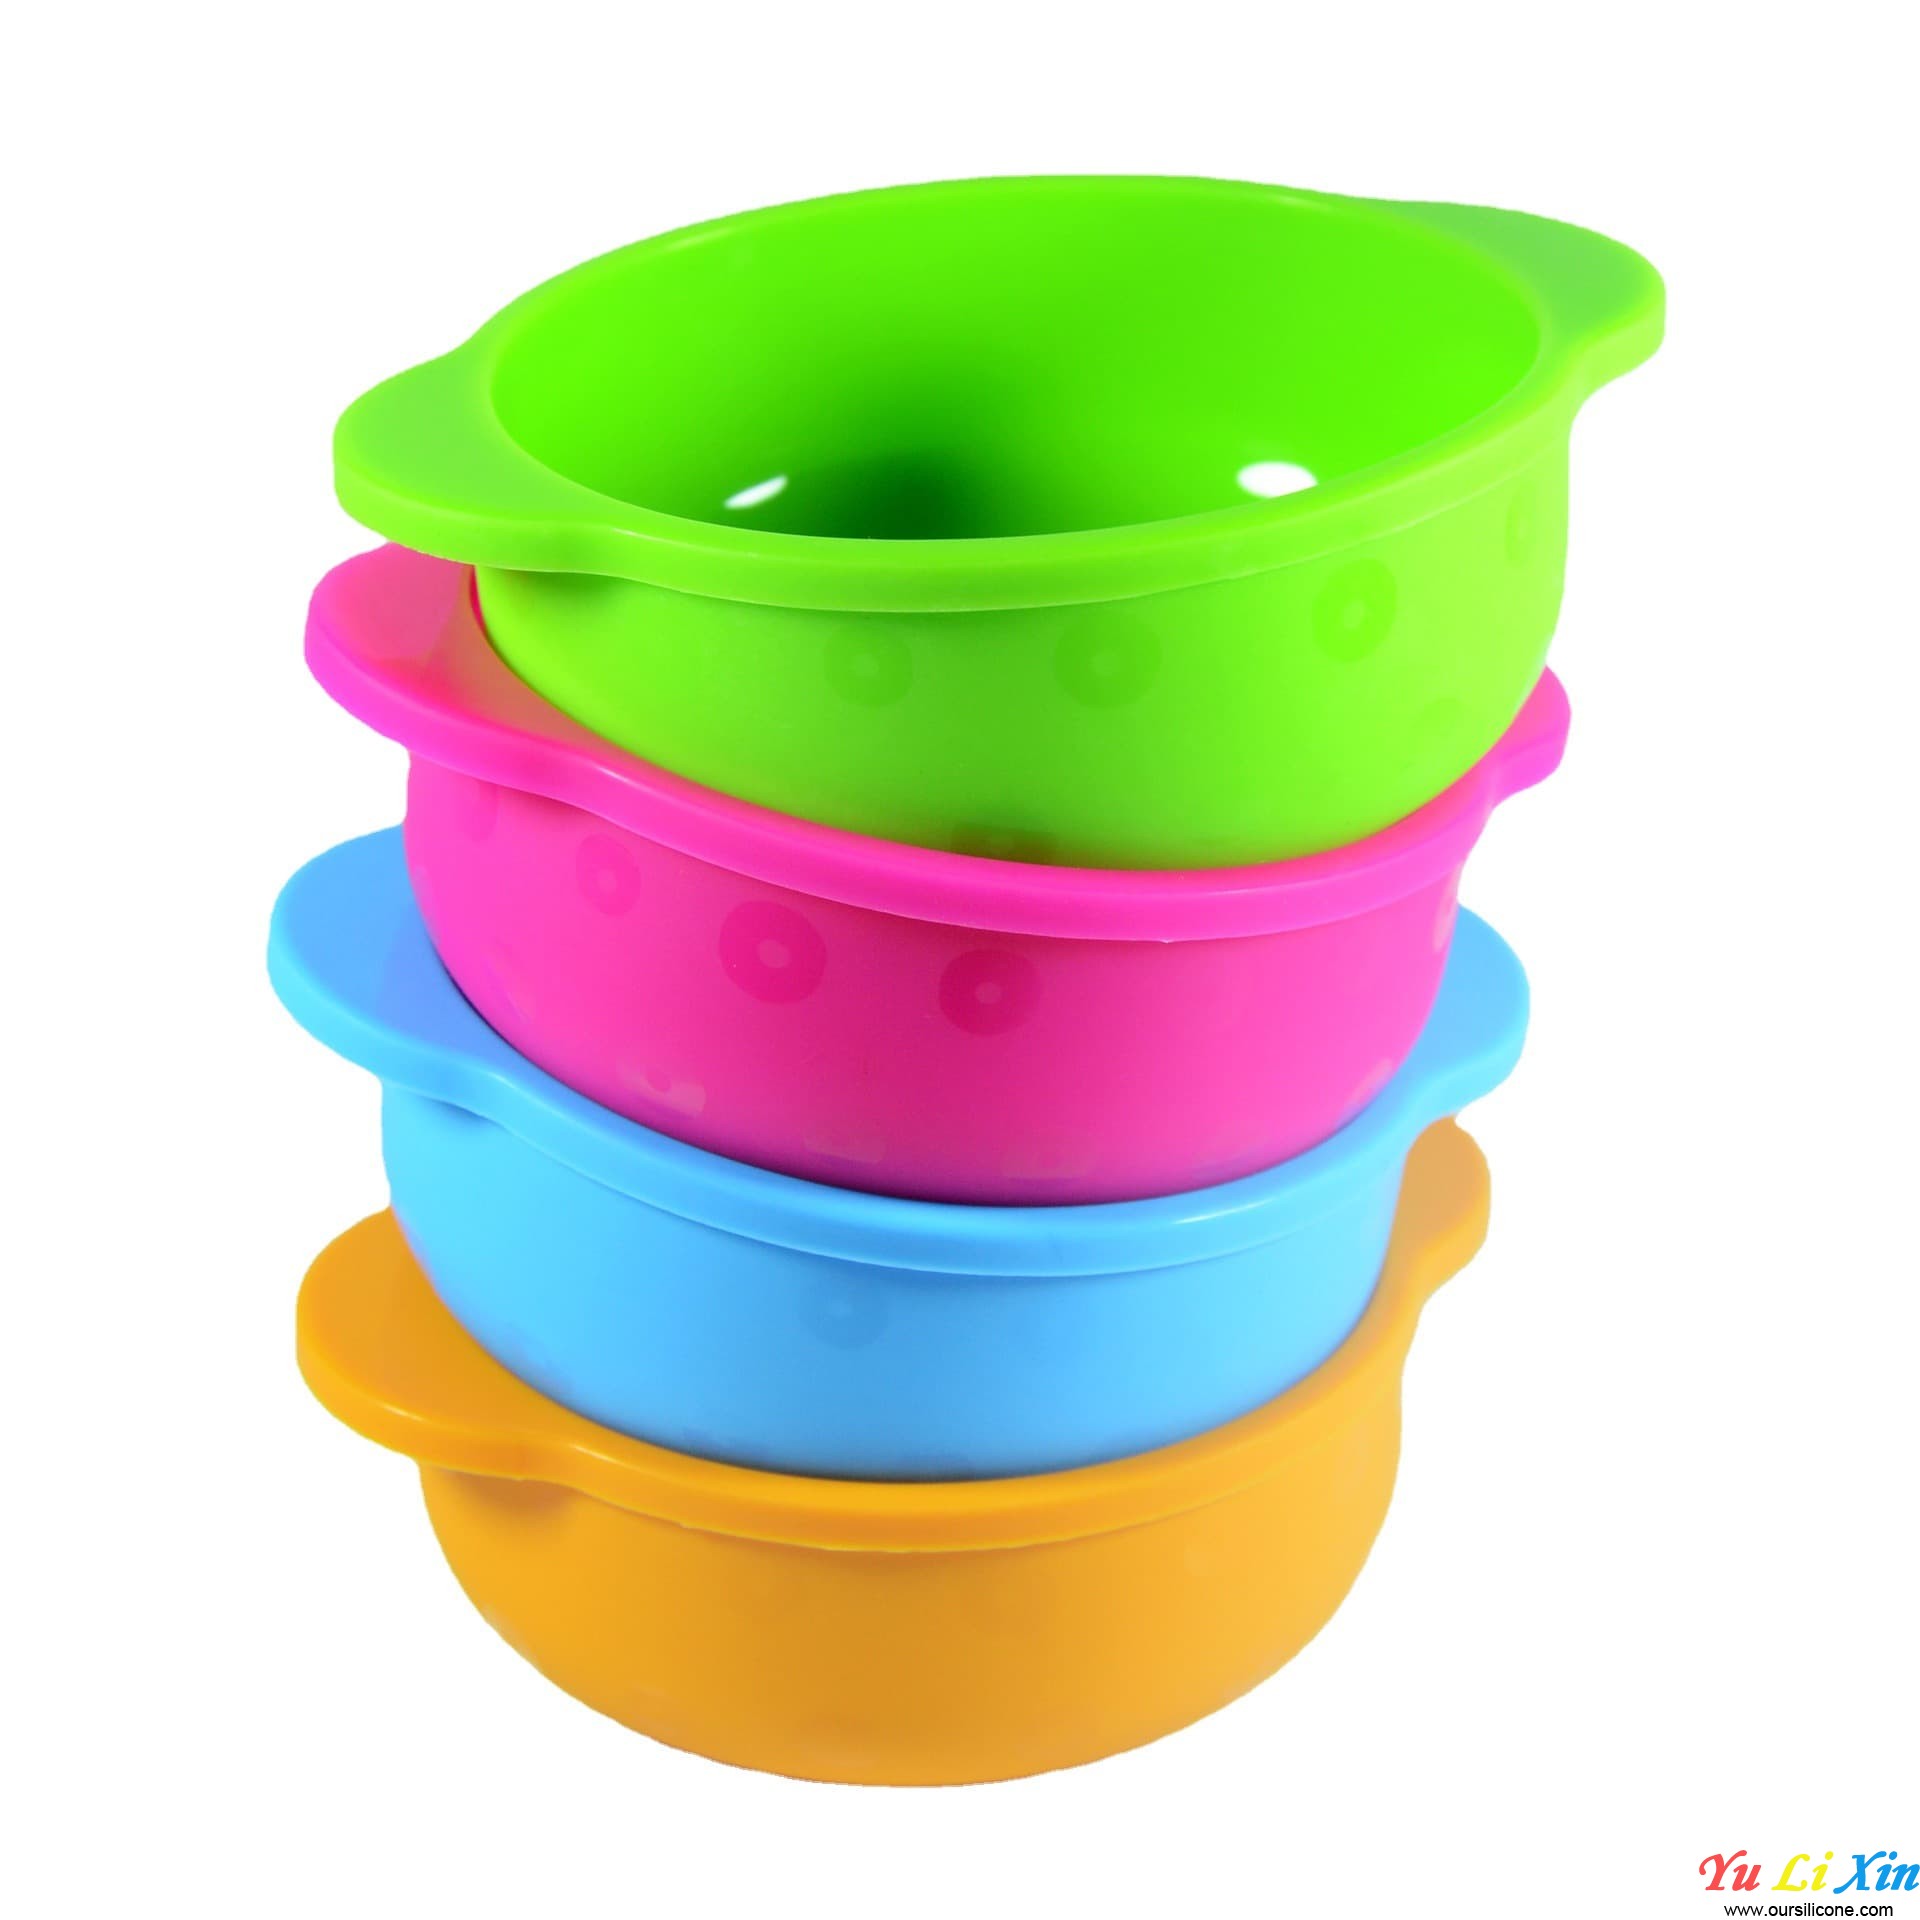 Silicone Bowls For Serving Food